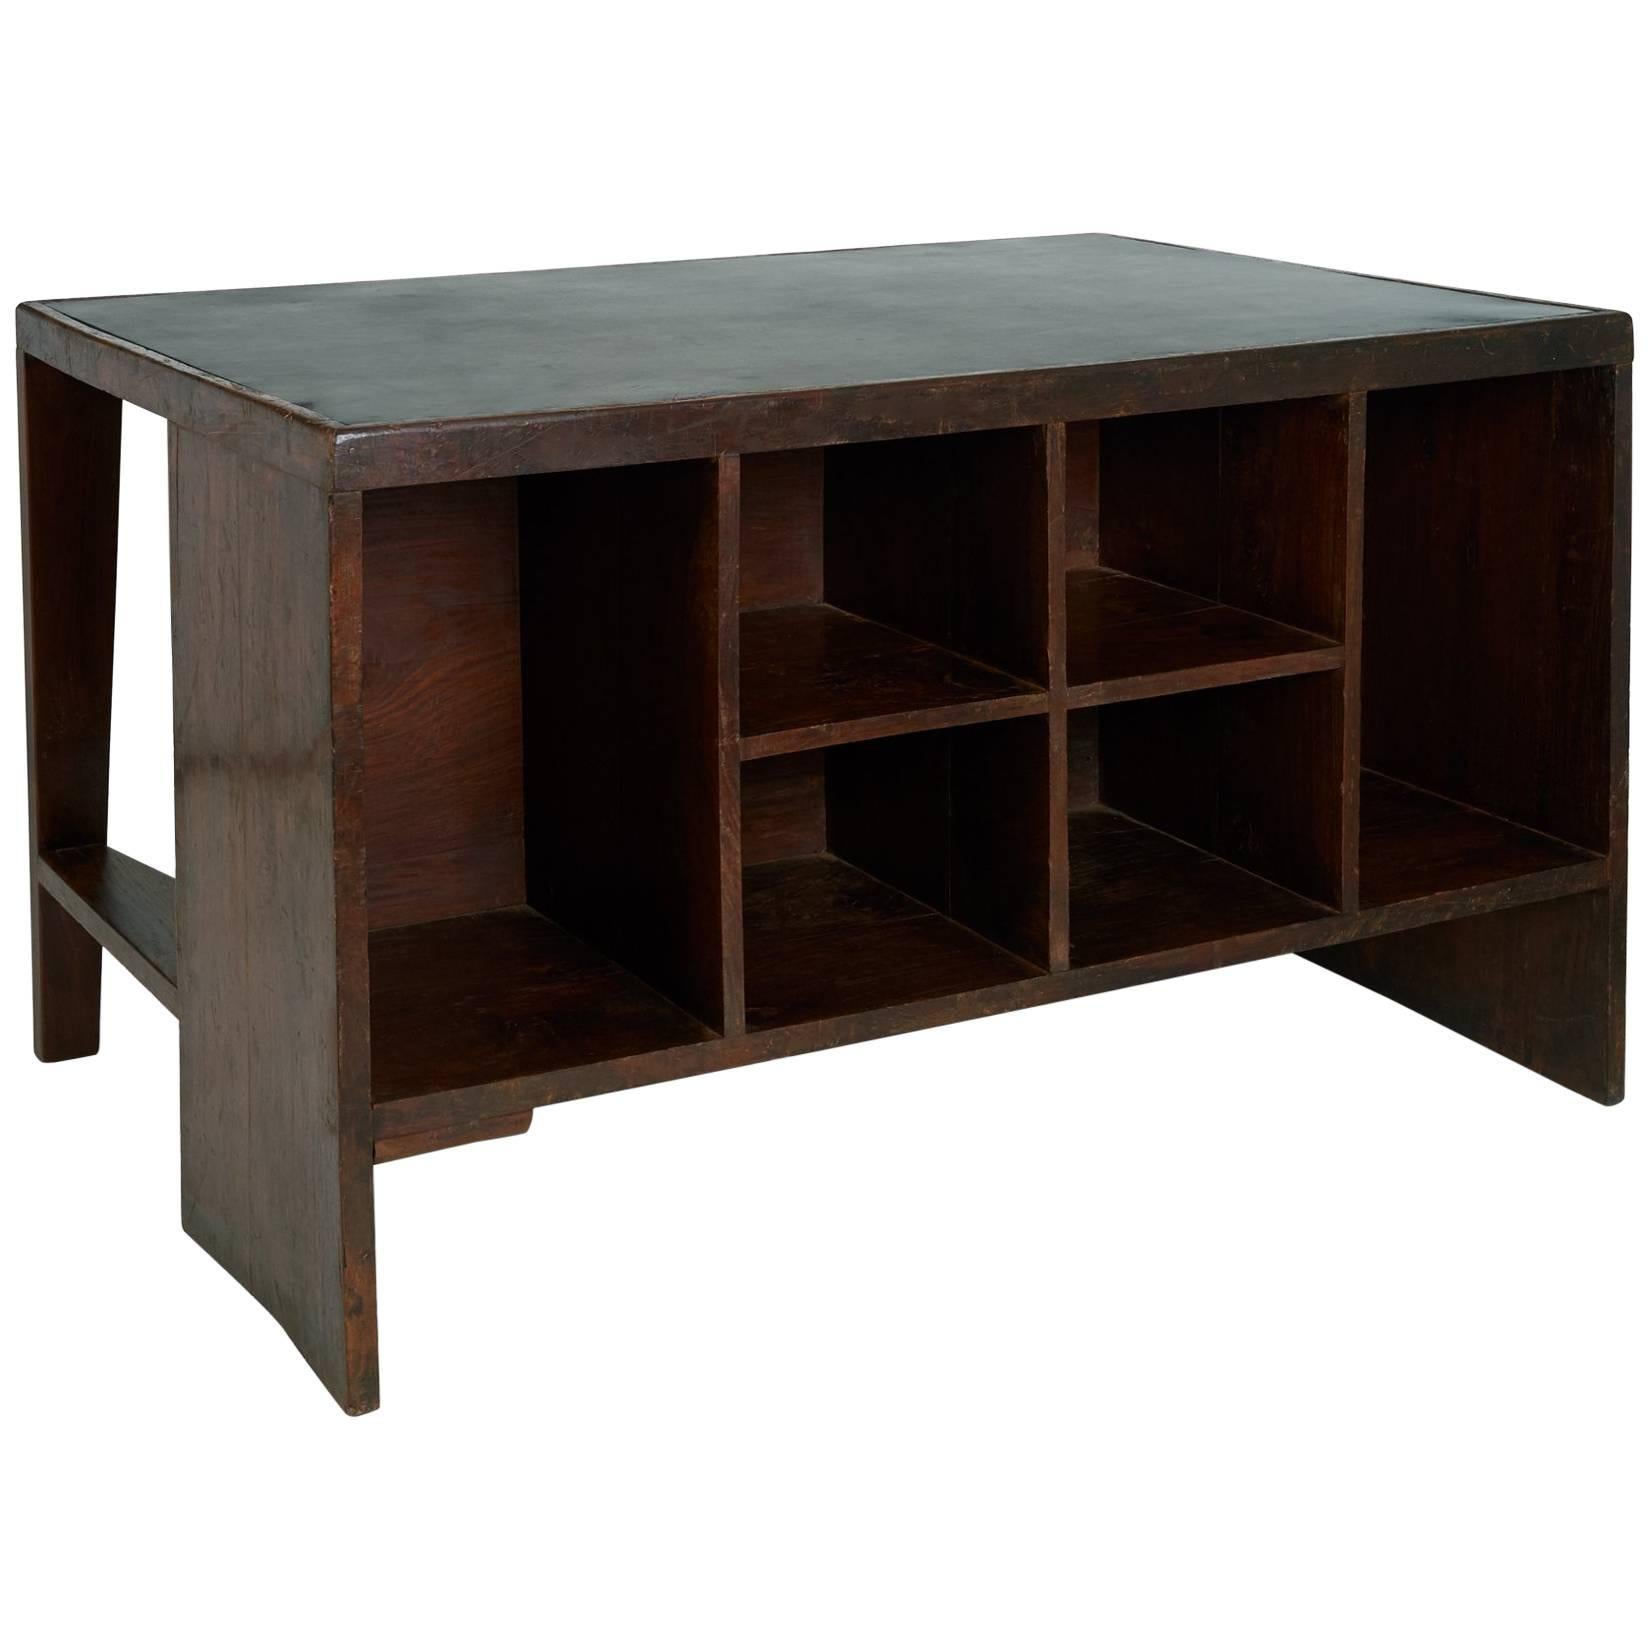 Exceptional Chandigarh Pigeonhole Desk by Pierre Jeanneret, France/India c. 1957